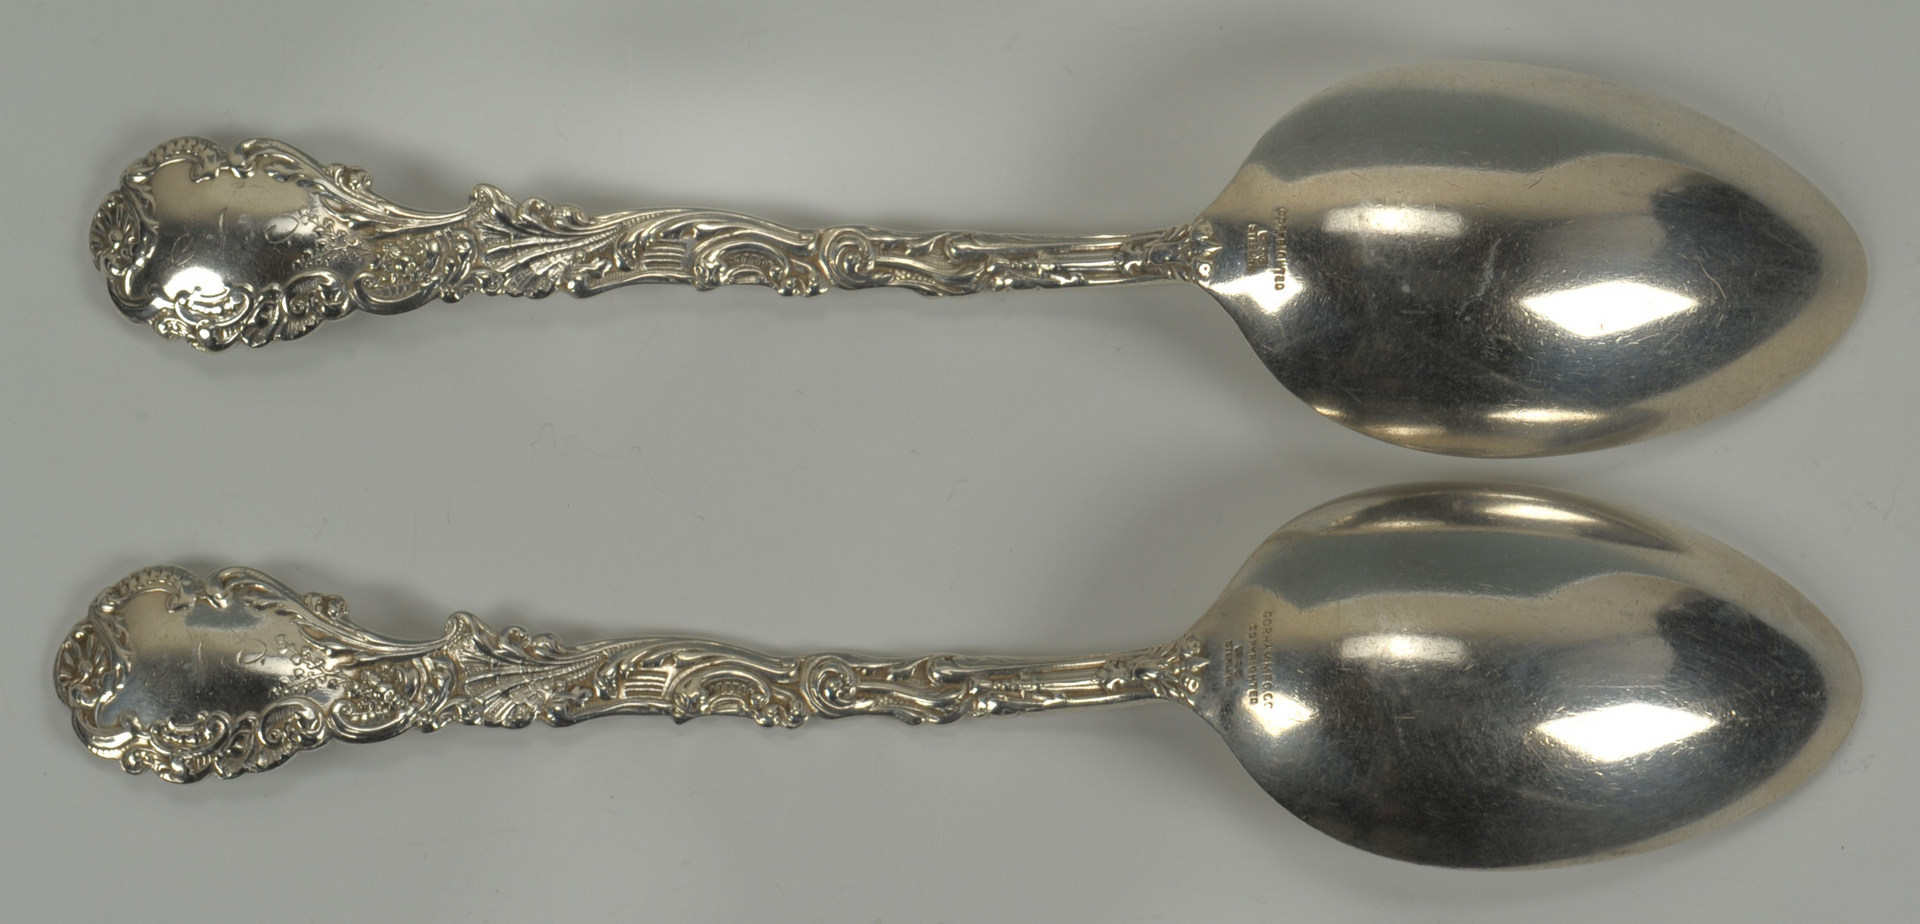 Lot 241: Tiffany sterling spoons and Gorham Versailles